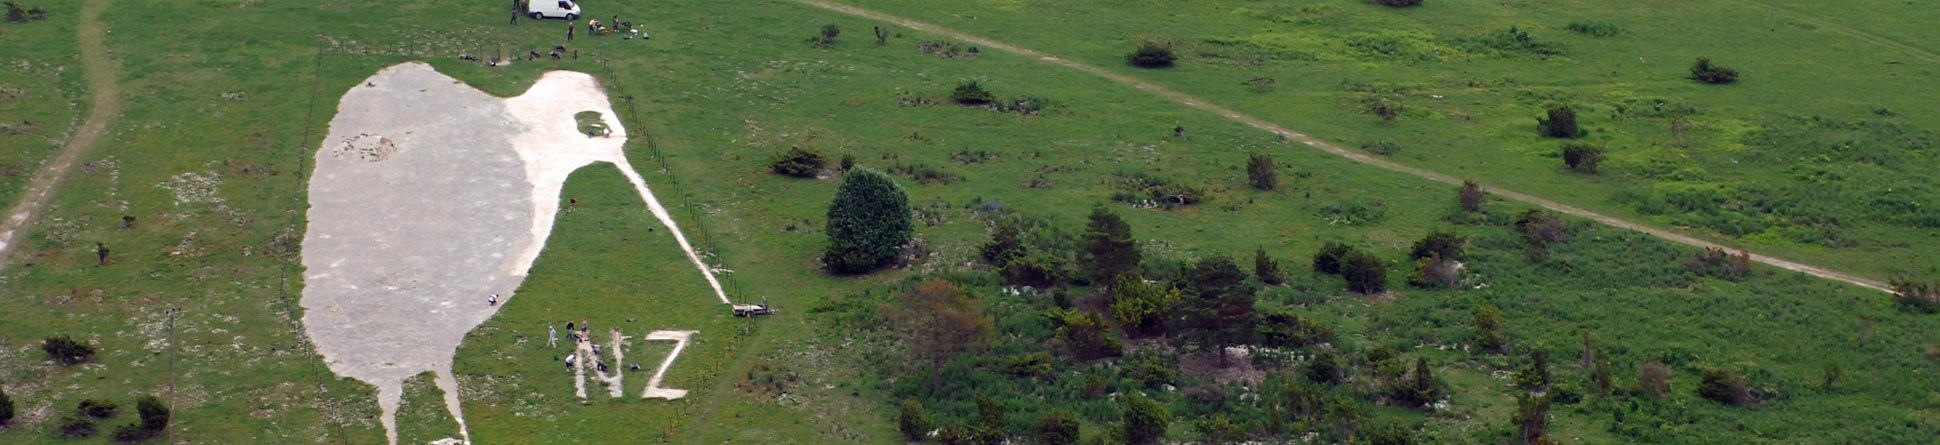 Aerial view of the Bulford Kiwi which is carved into the hillside above Bulford Camp in Wiltshire.